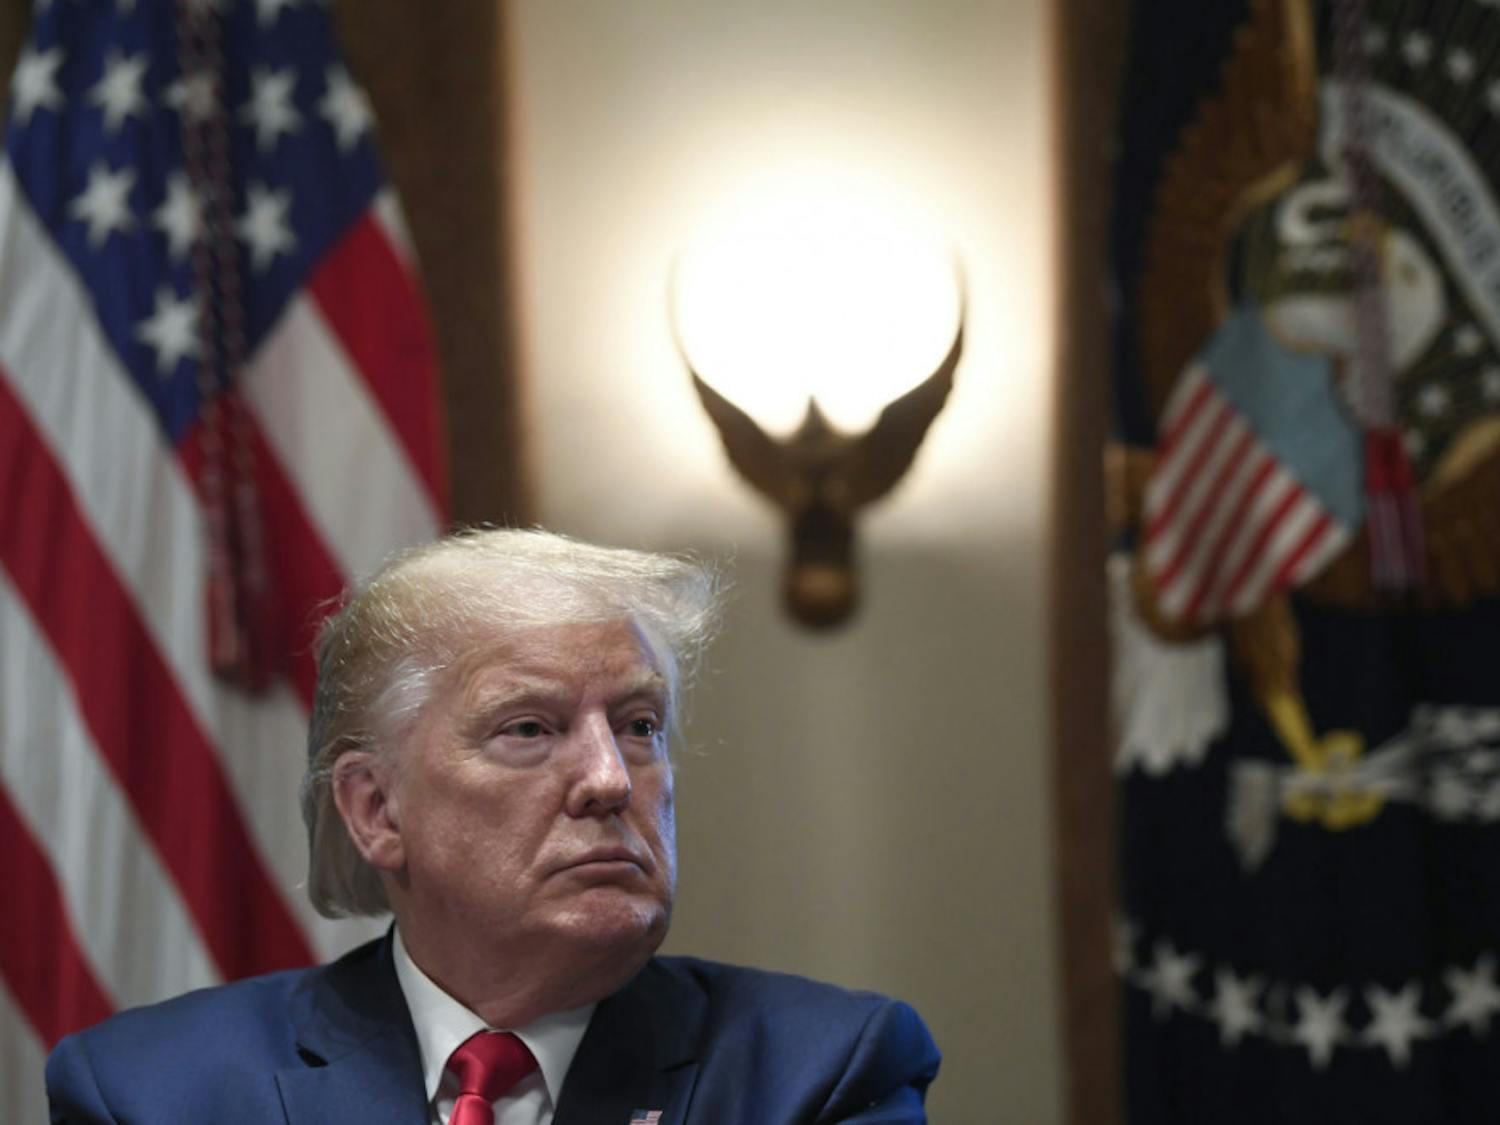 President Donald Trump listens during a meeting in the Cabinet Room of the White House in Washington, Friday, Nov. 22, 2019, on youth vaping and the electronic cigarette epidemic. (AP Photo/Susan Walsh)